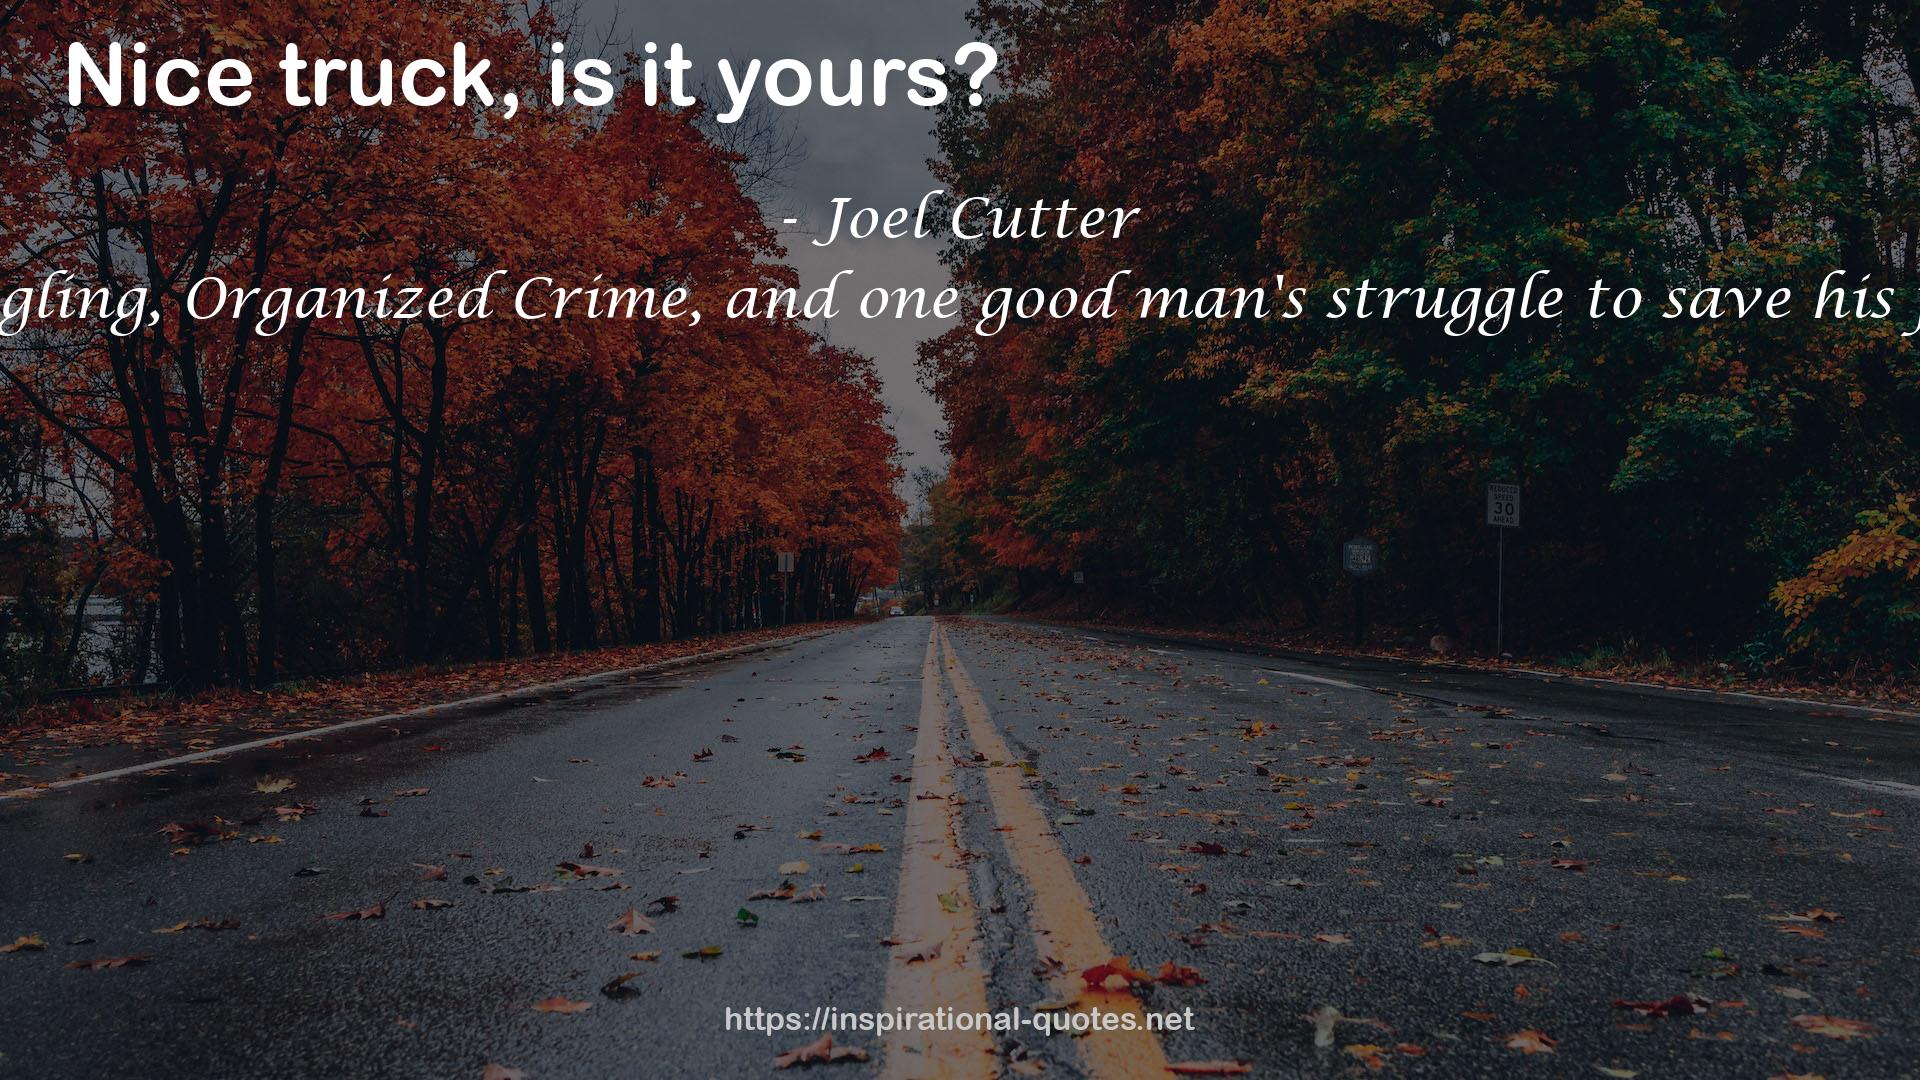 Joel Cutter QUOTES